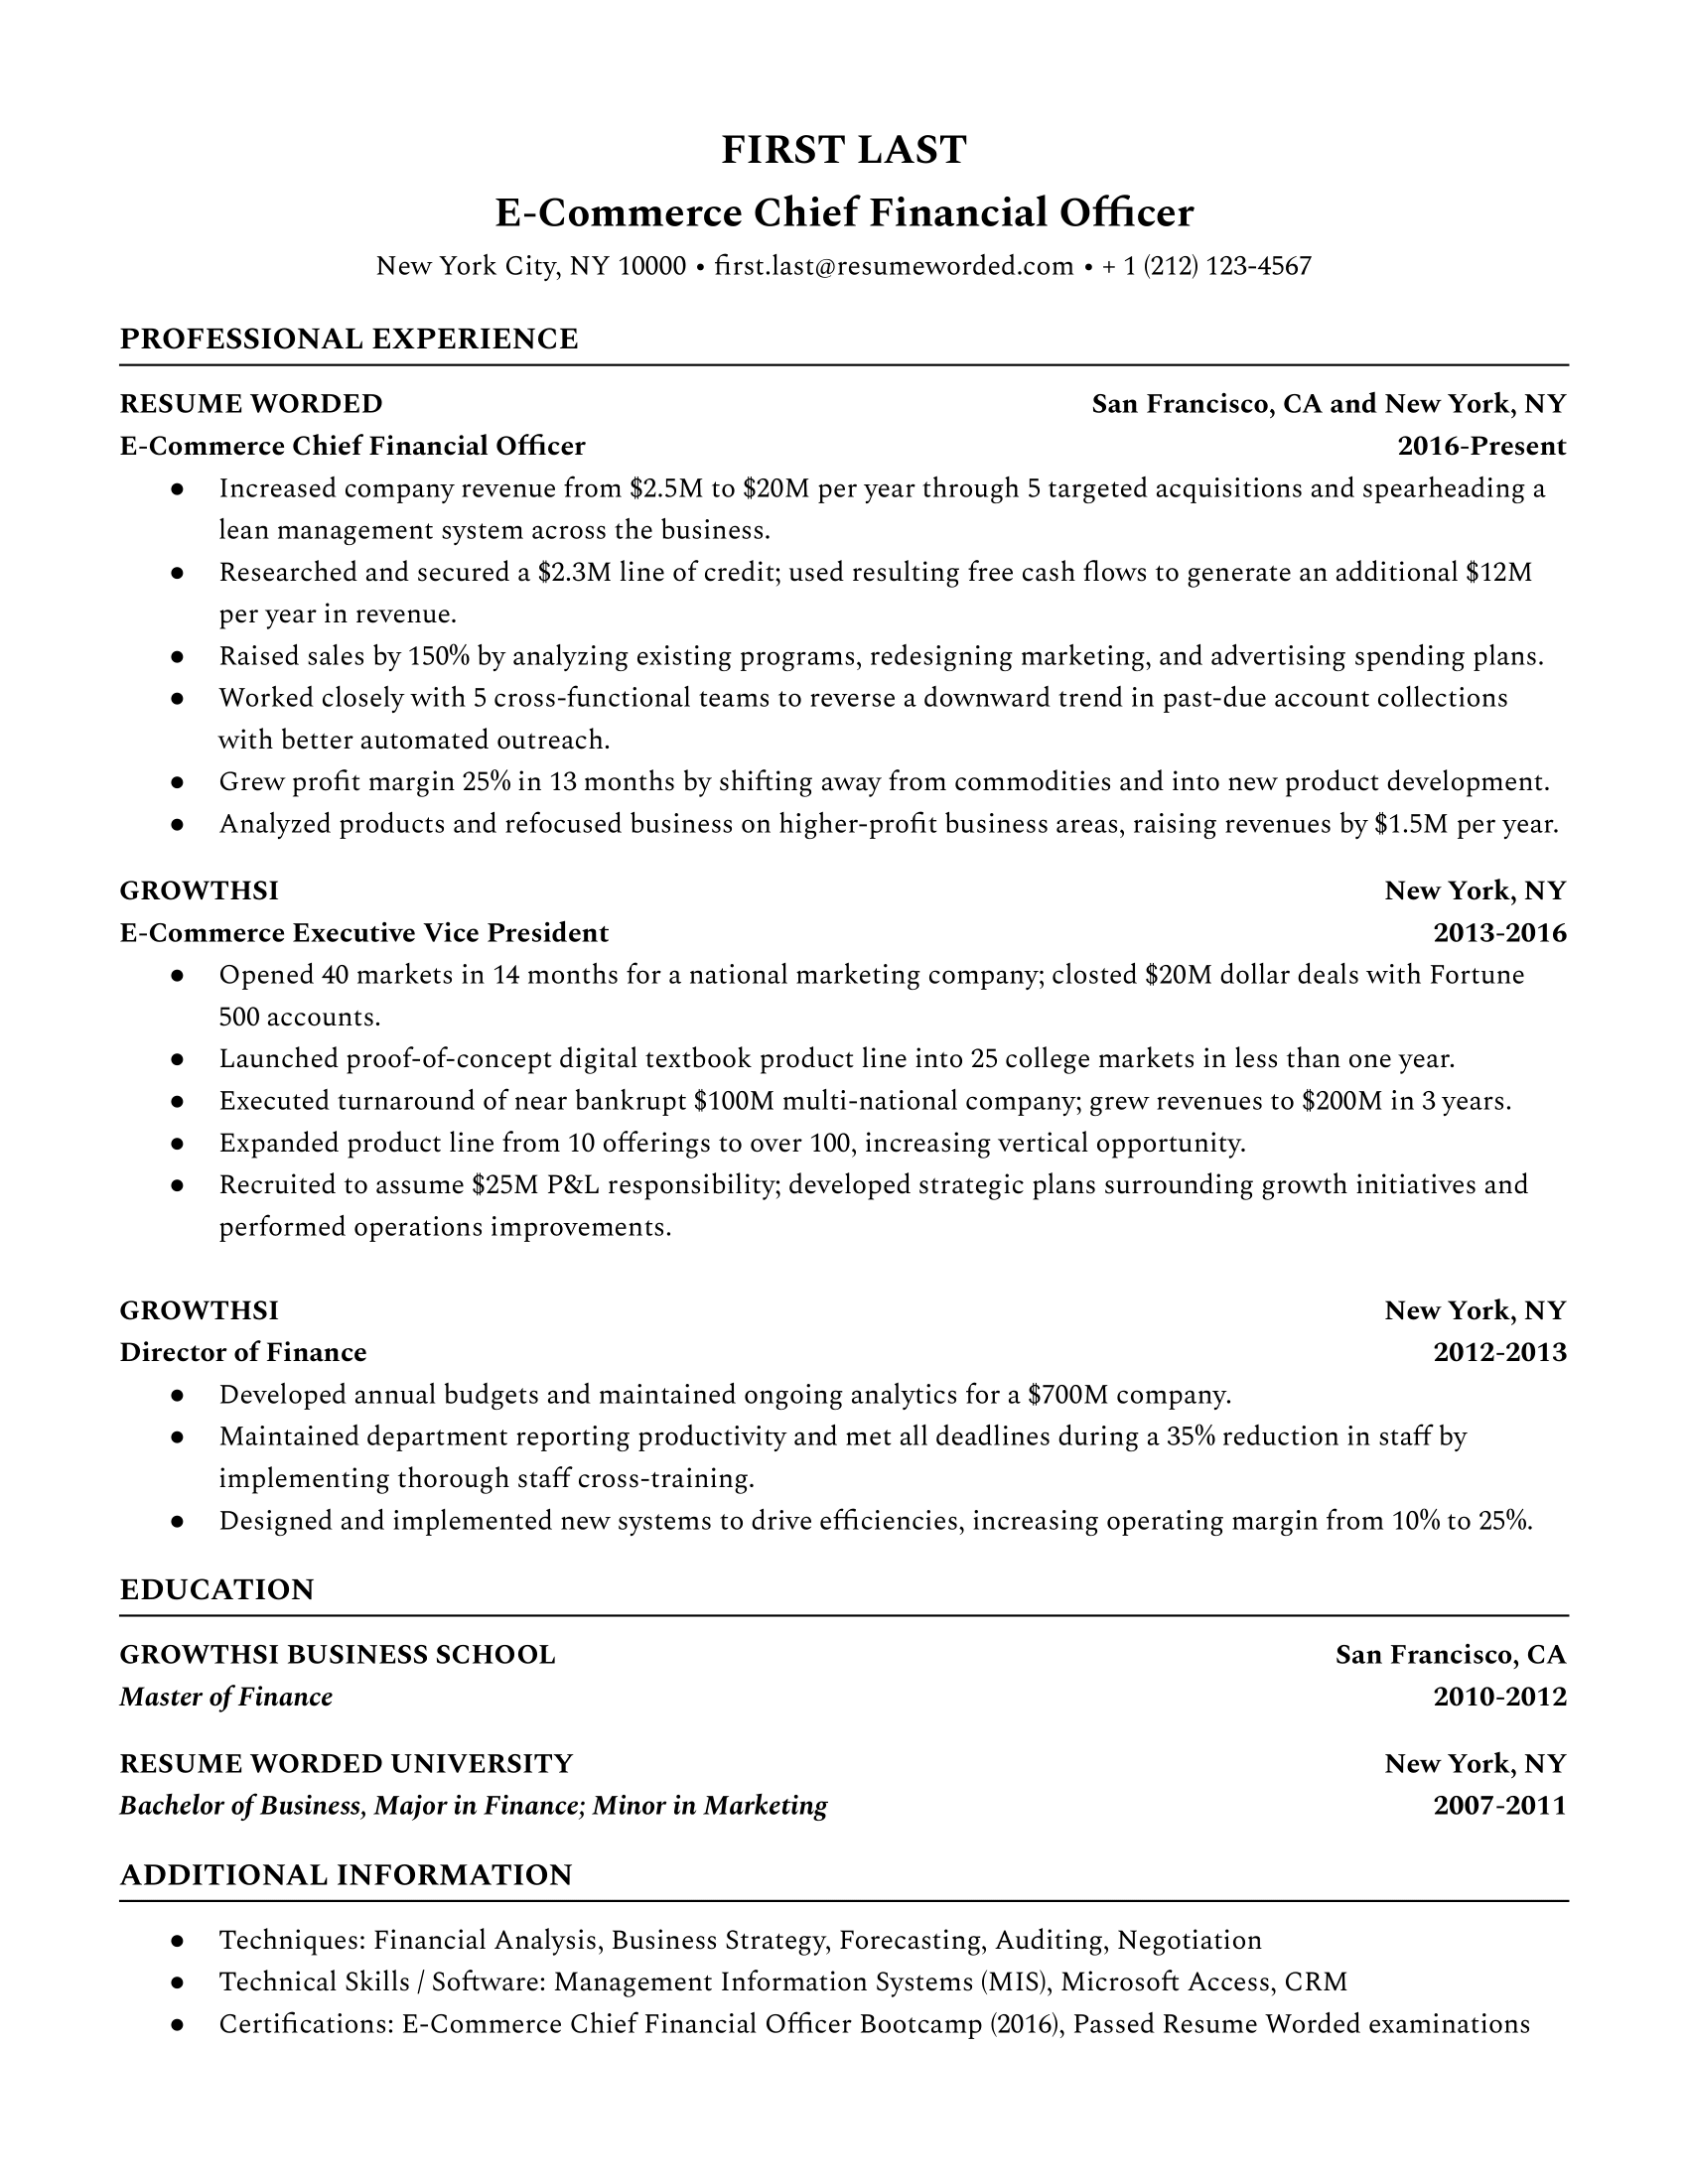 E-Commerce Chief Financial Officer Resume Template + Example